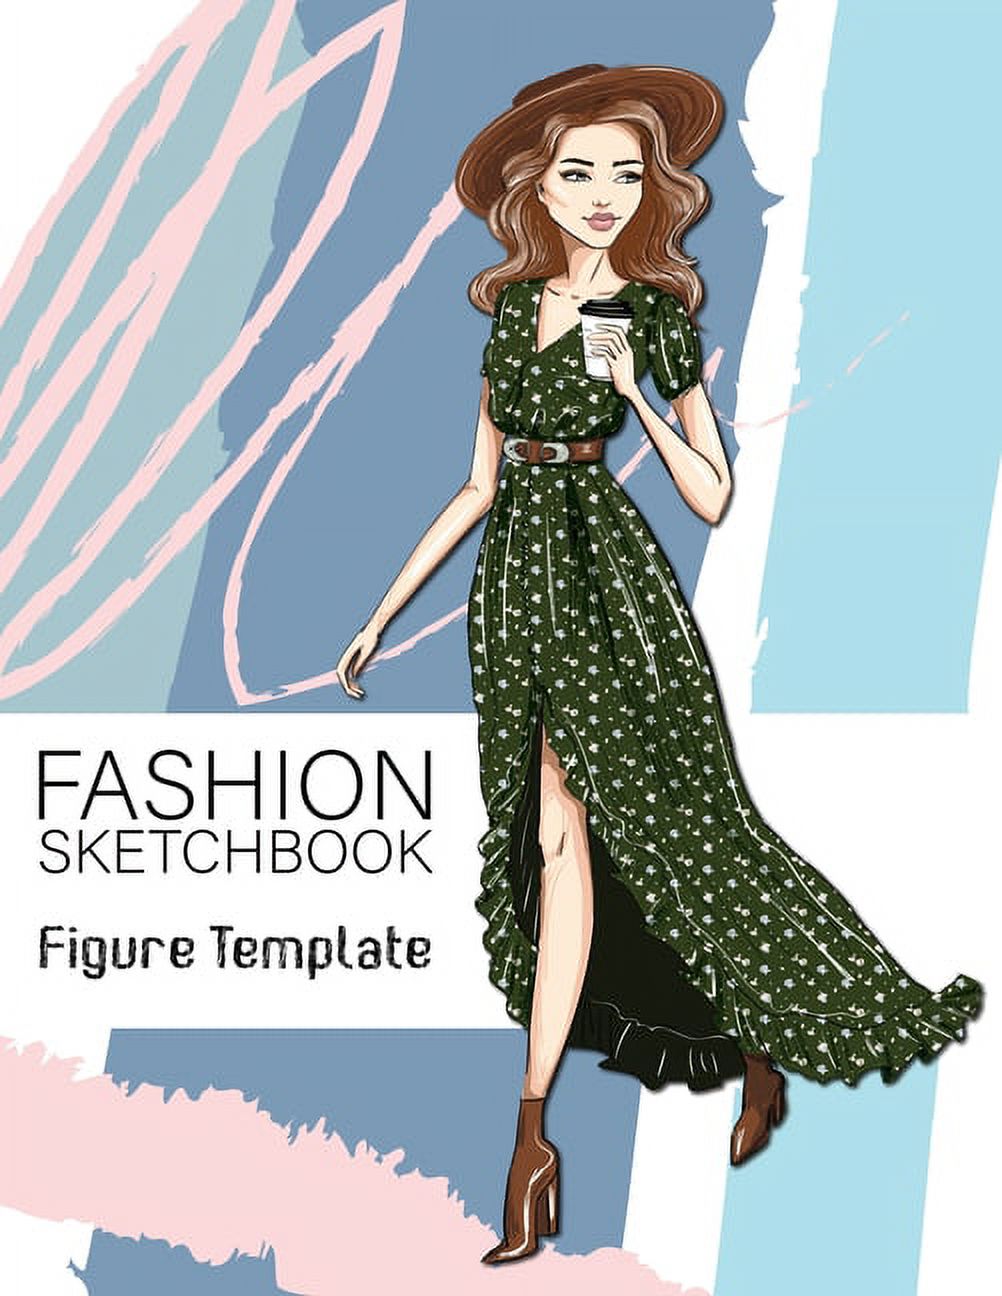 Fashion Sketchbook Figure Template : Large Female Figure Template for  Easily Sketching Your Fashion Design Styles and Building Your Portfolio  Large